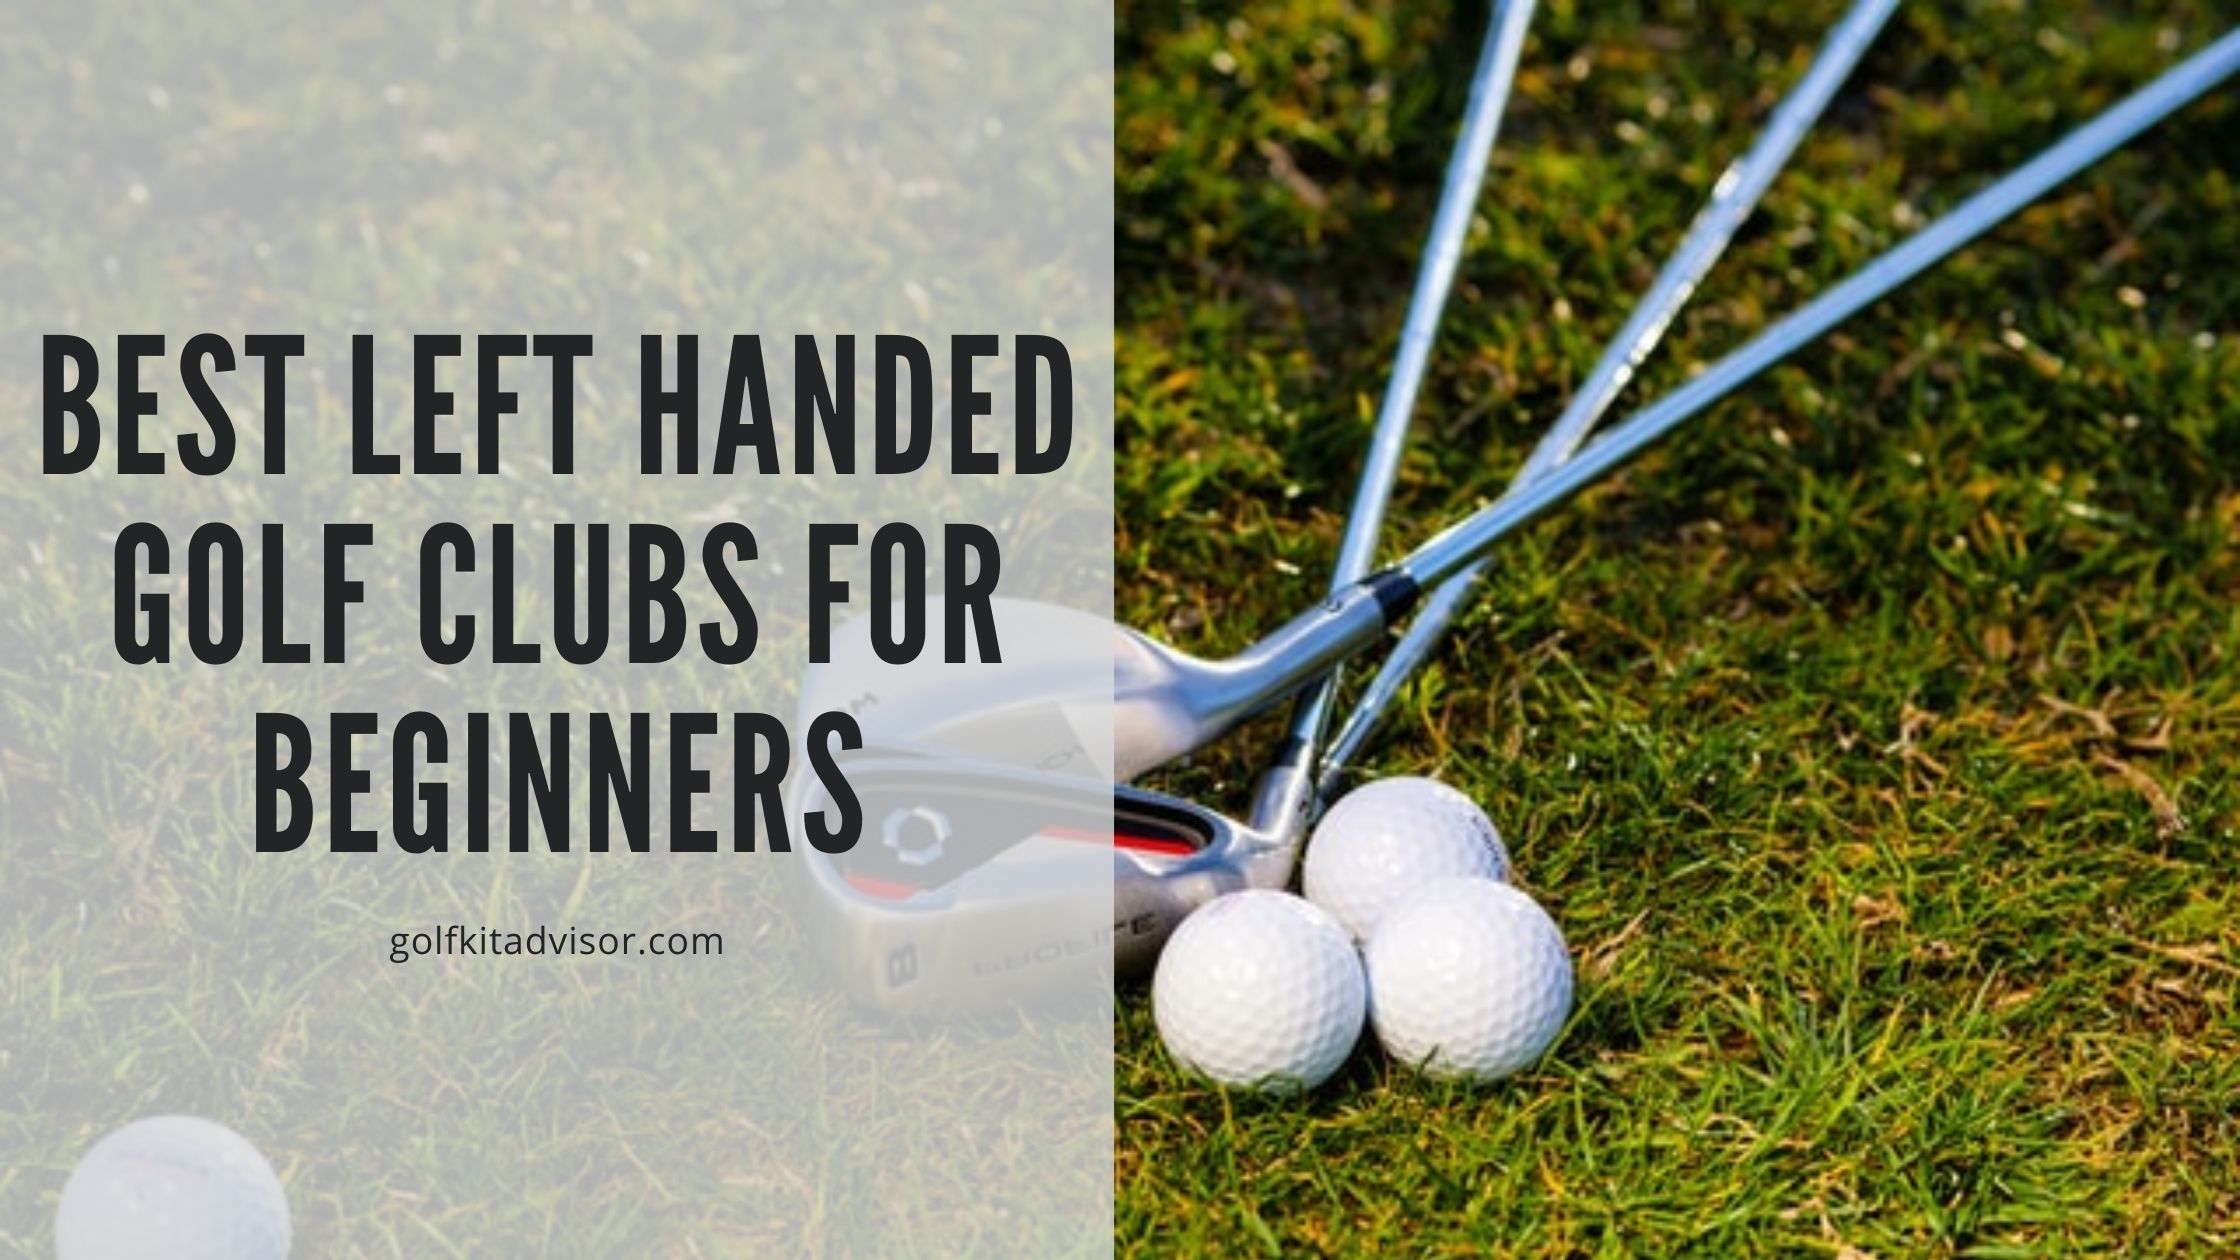 Best Left Handed Golf Clubs for Beginners